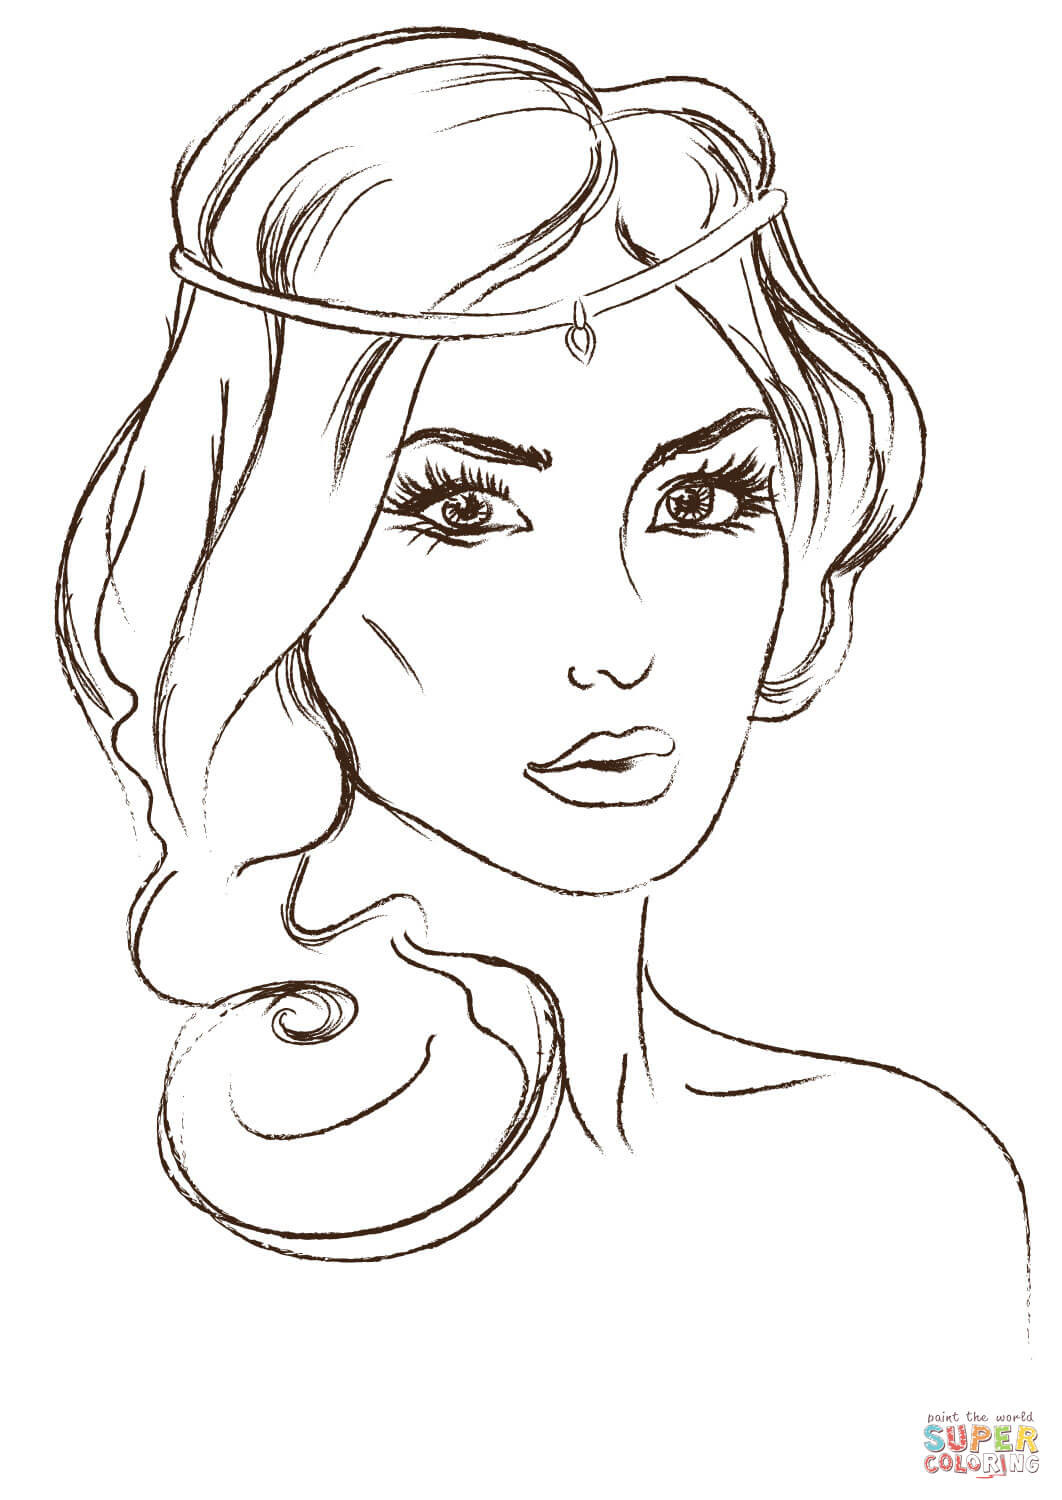 Coloring Pages Of Girls Faces
 Gorgeous Princess coloring page